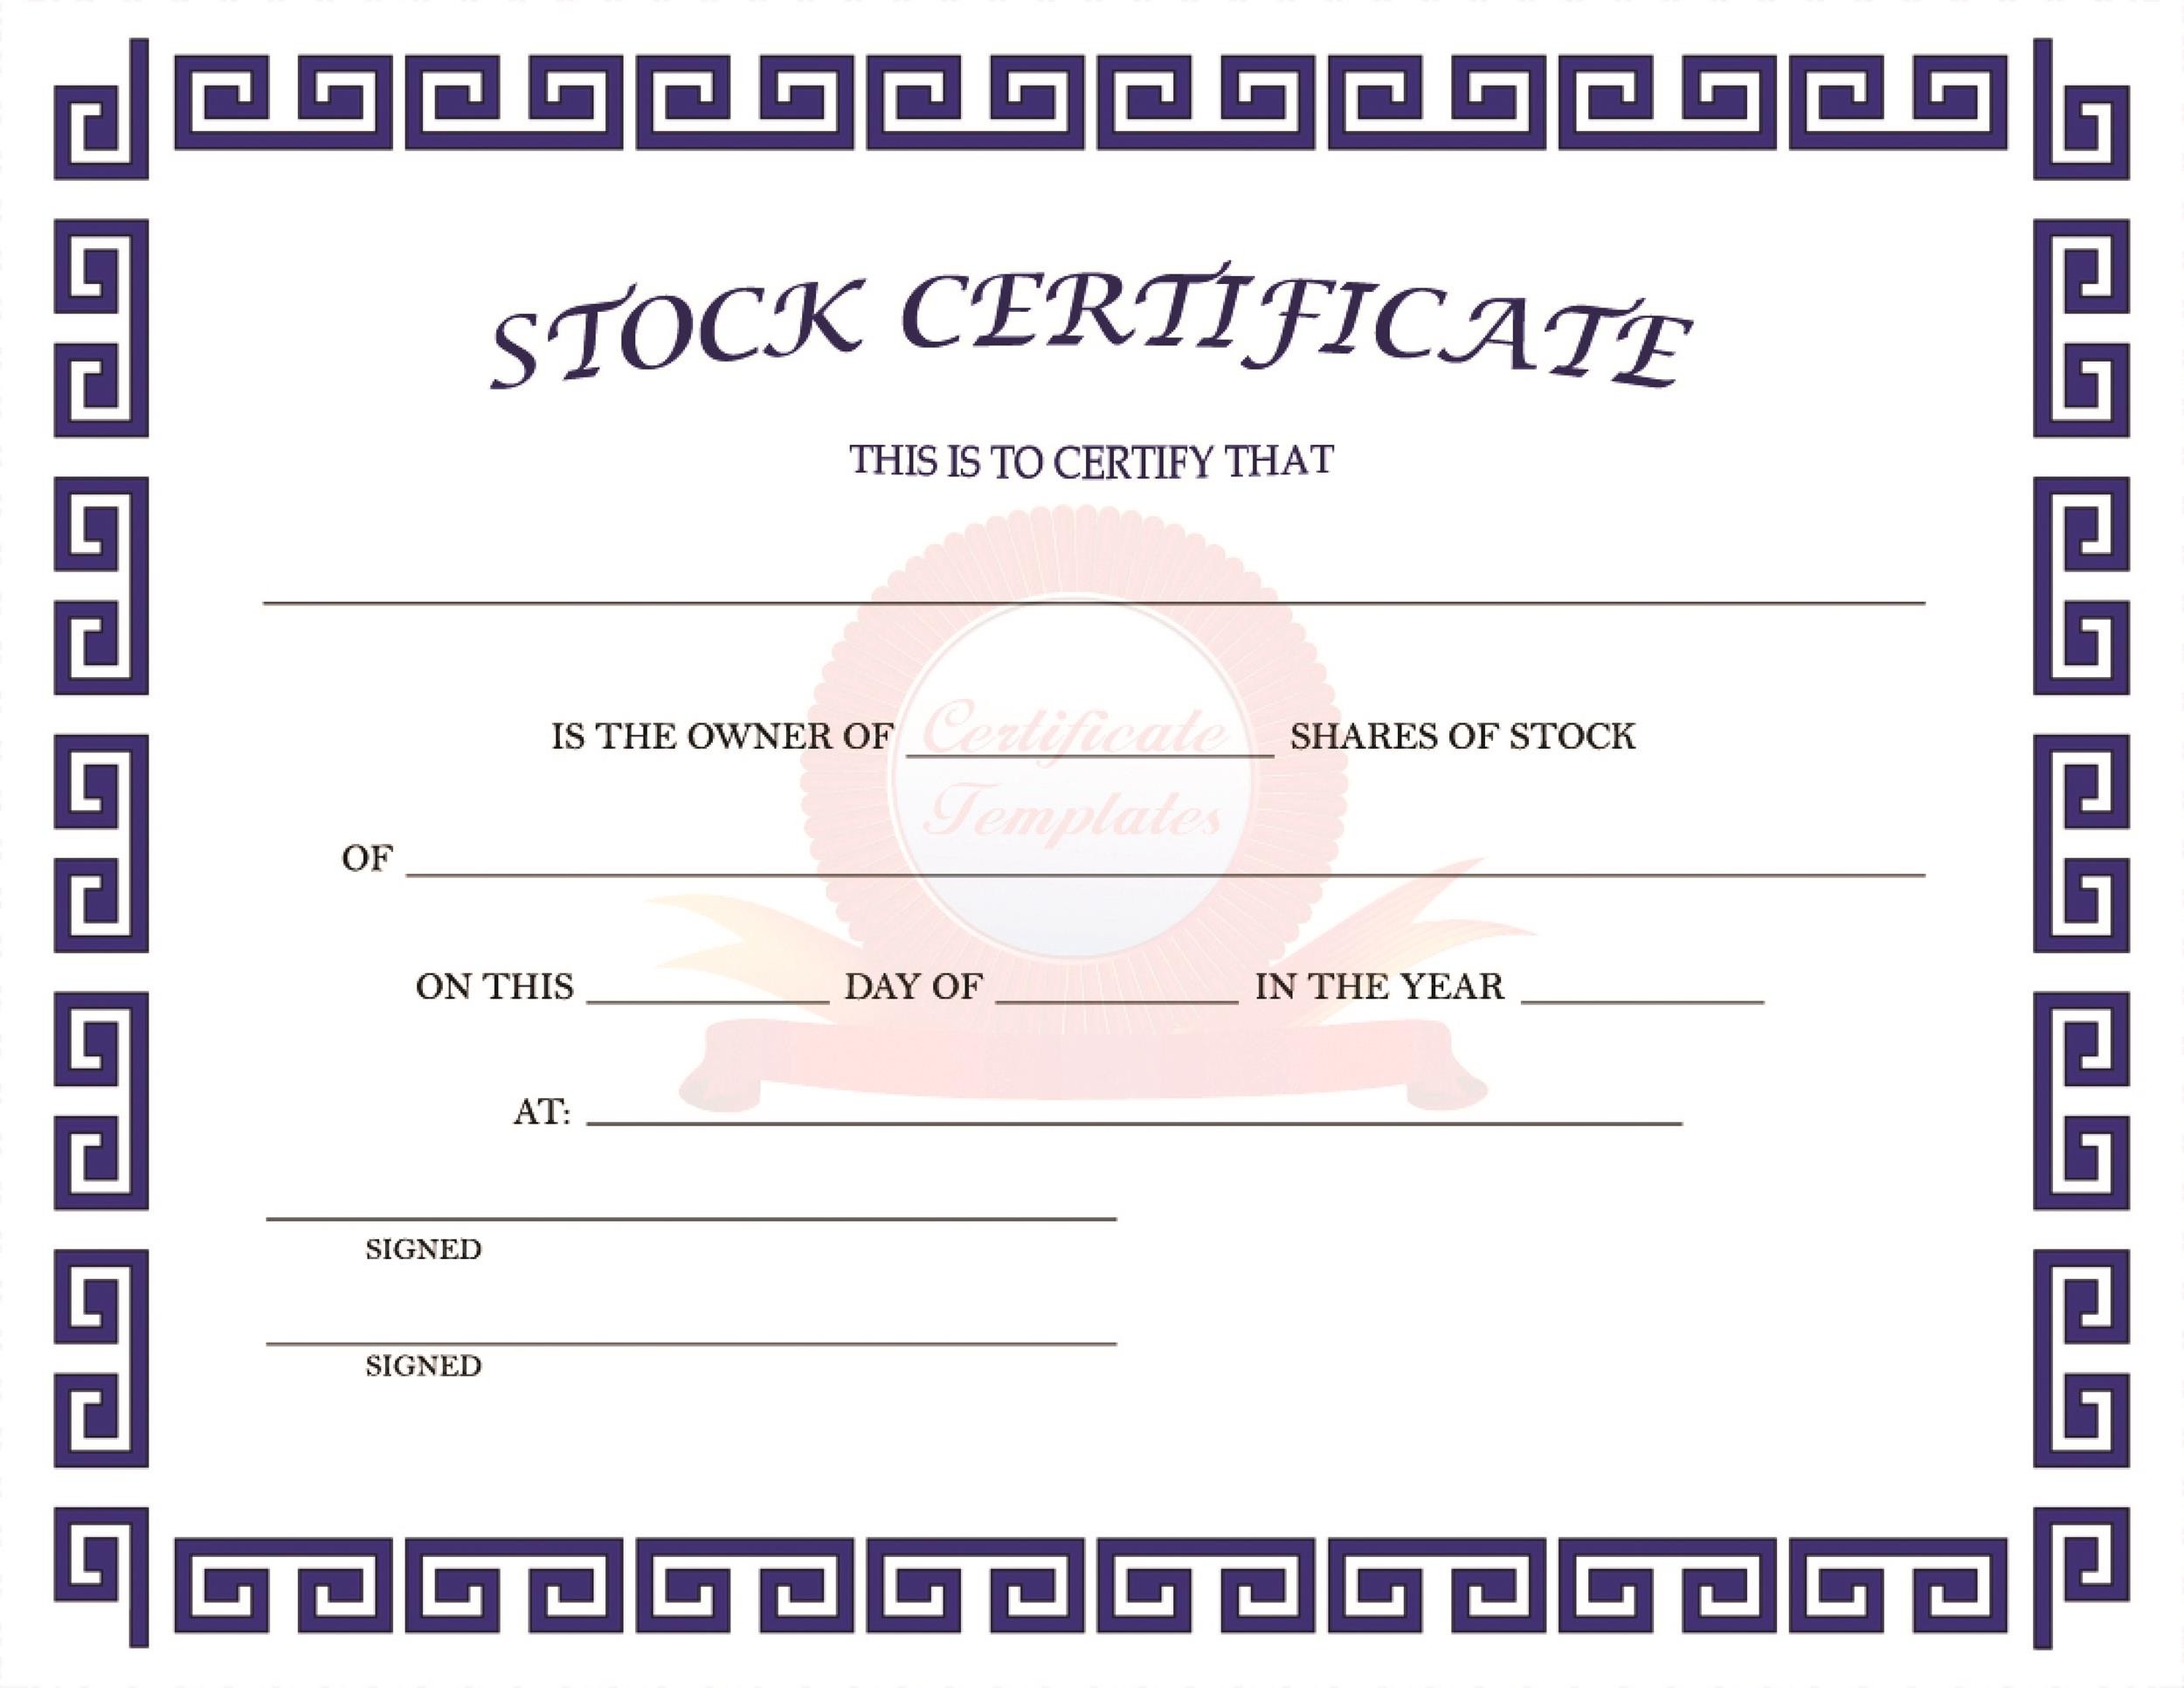 Share Certificate Format In Excel - Captions Trendy For Corporate Share Certificate Template